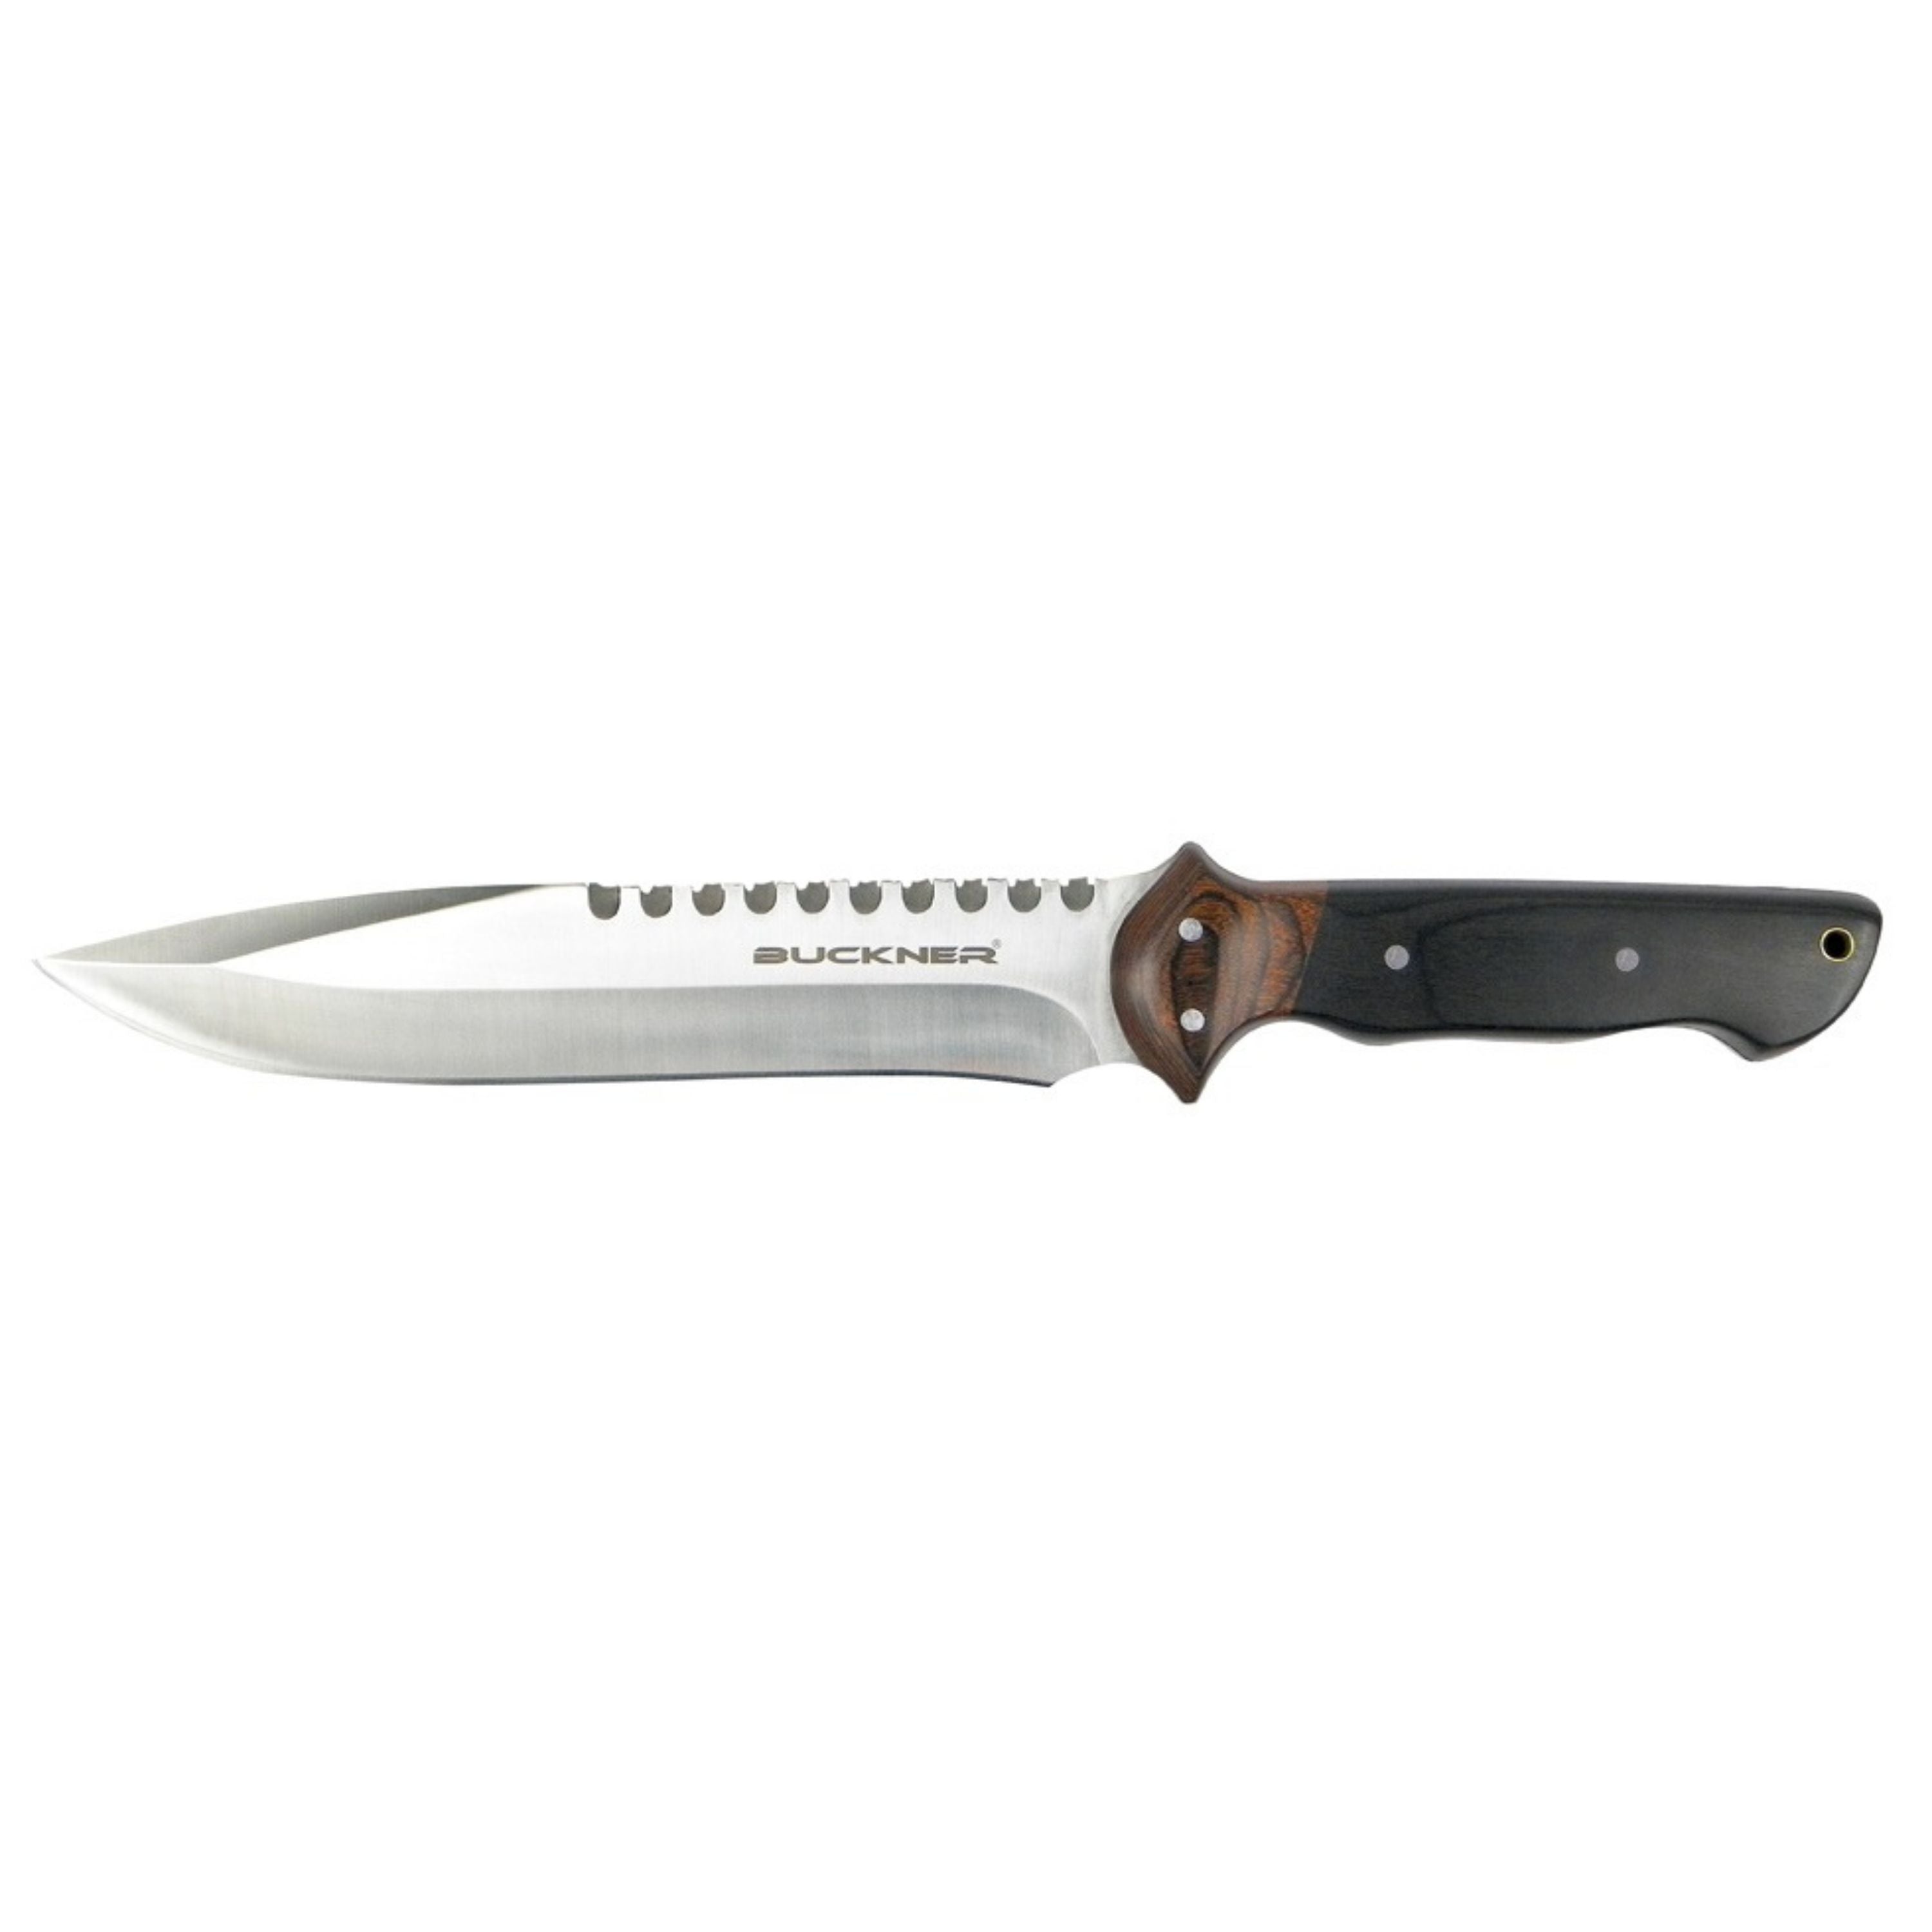 Couteau "Bowie" - 14 po||14-inch "Bowie" knife